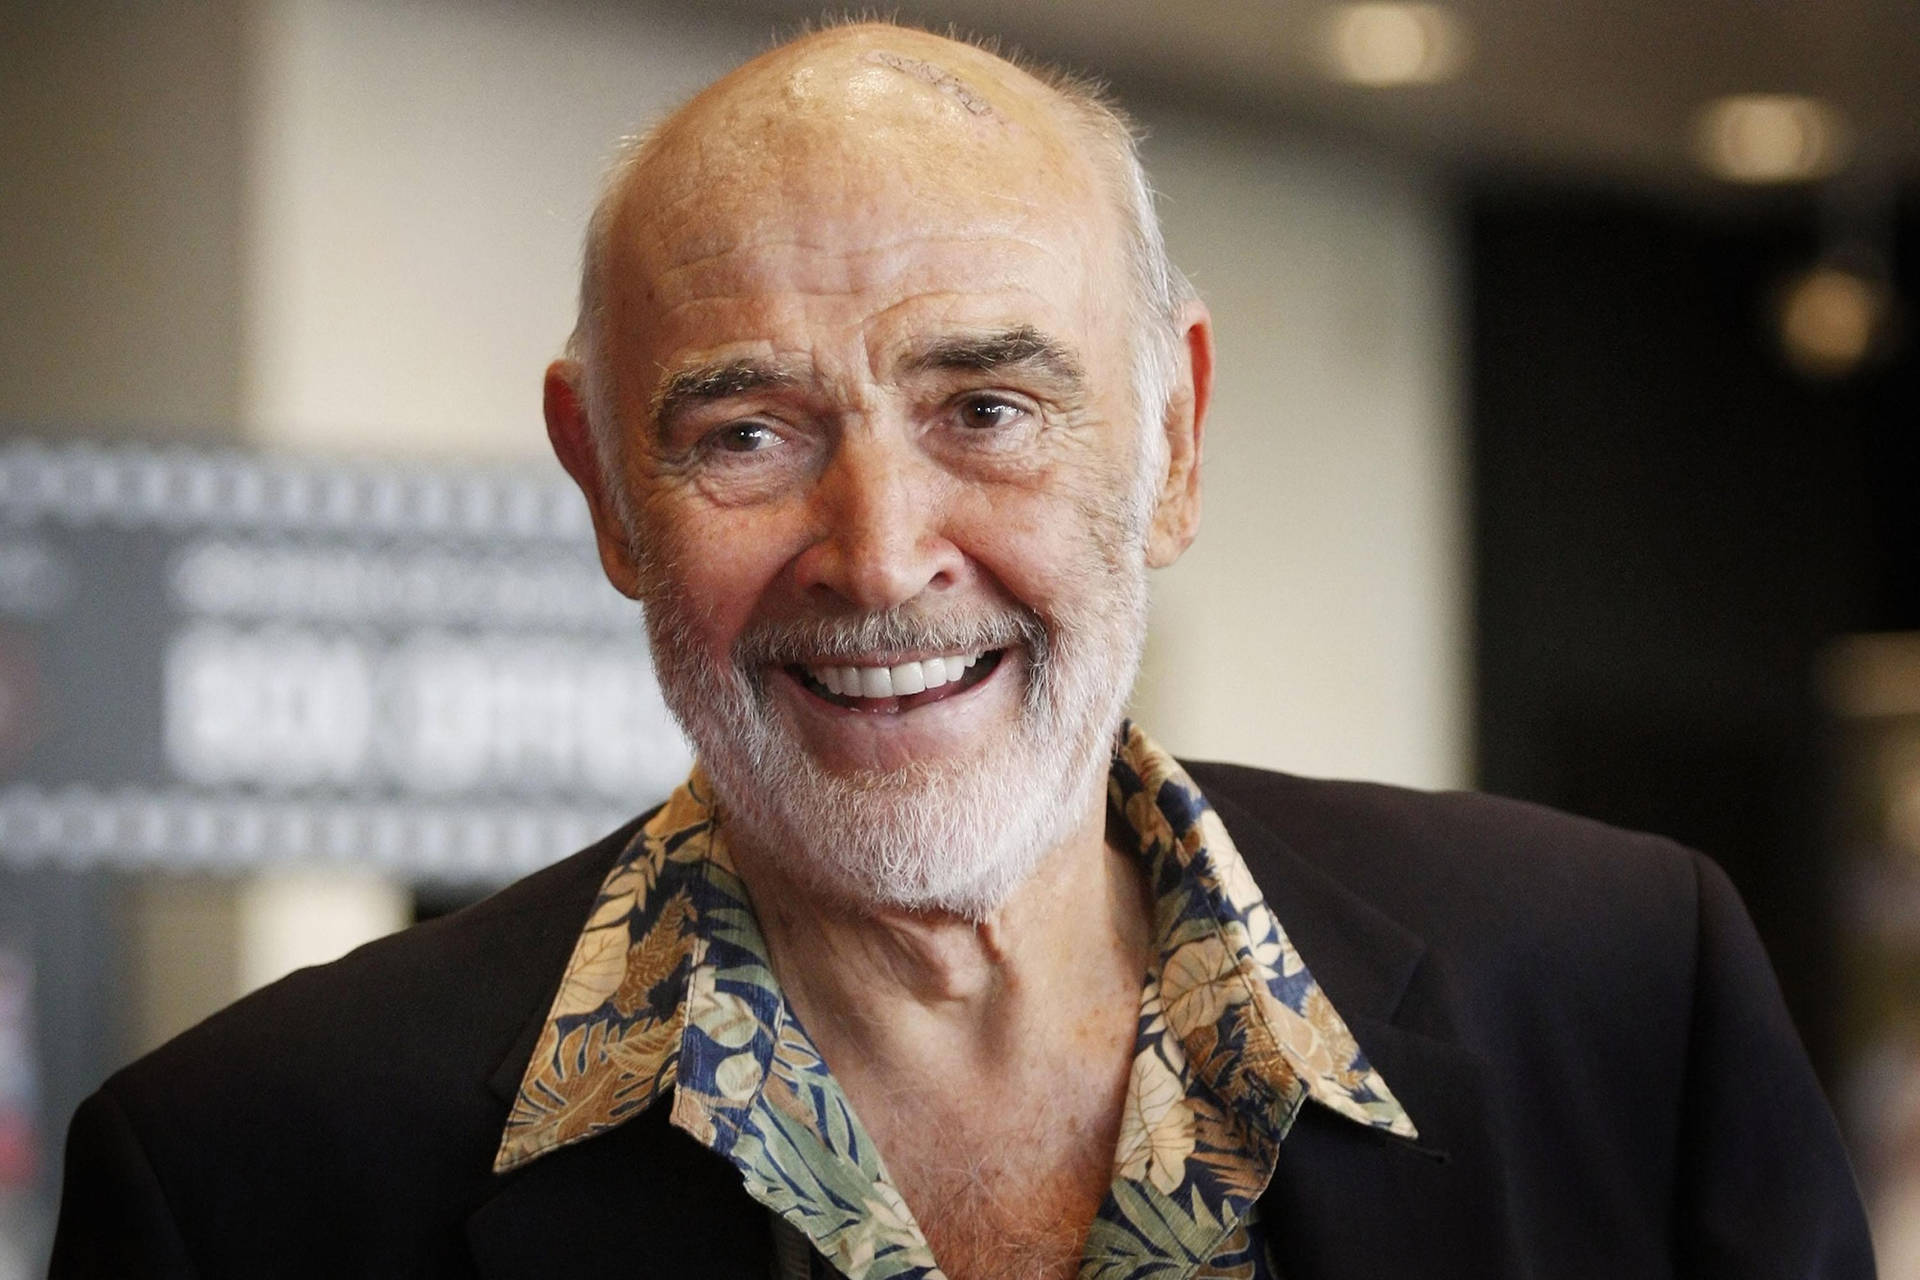 Smiling Actor Sean Connery Background